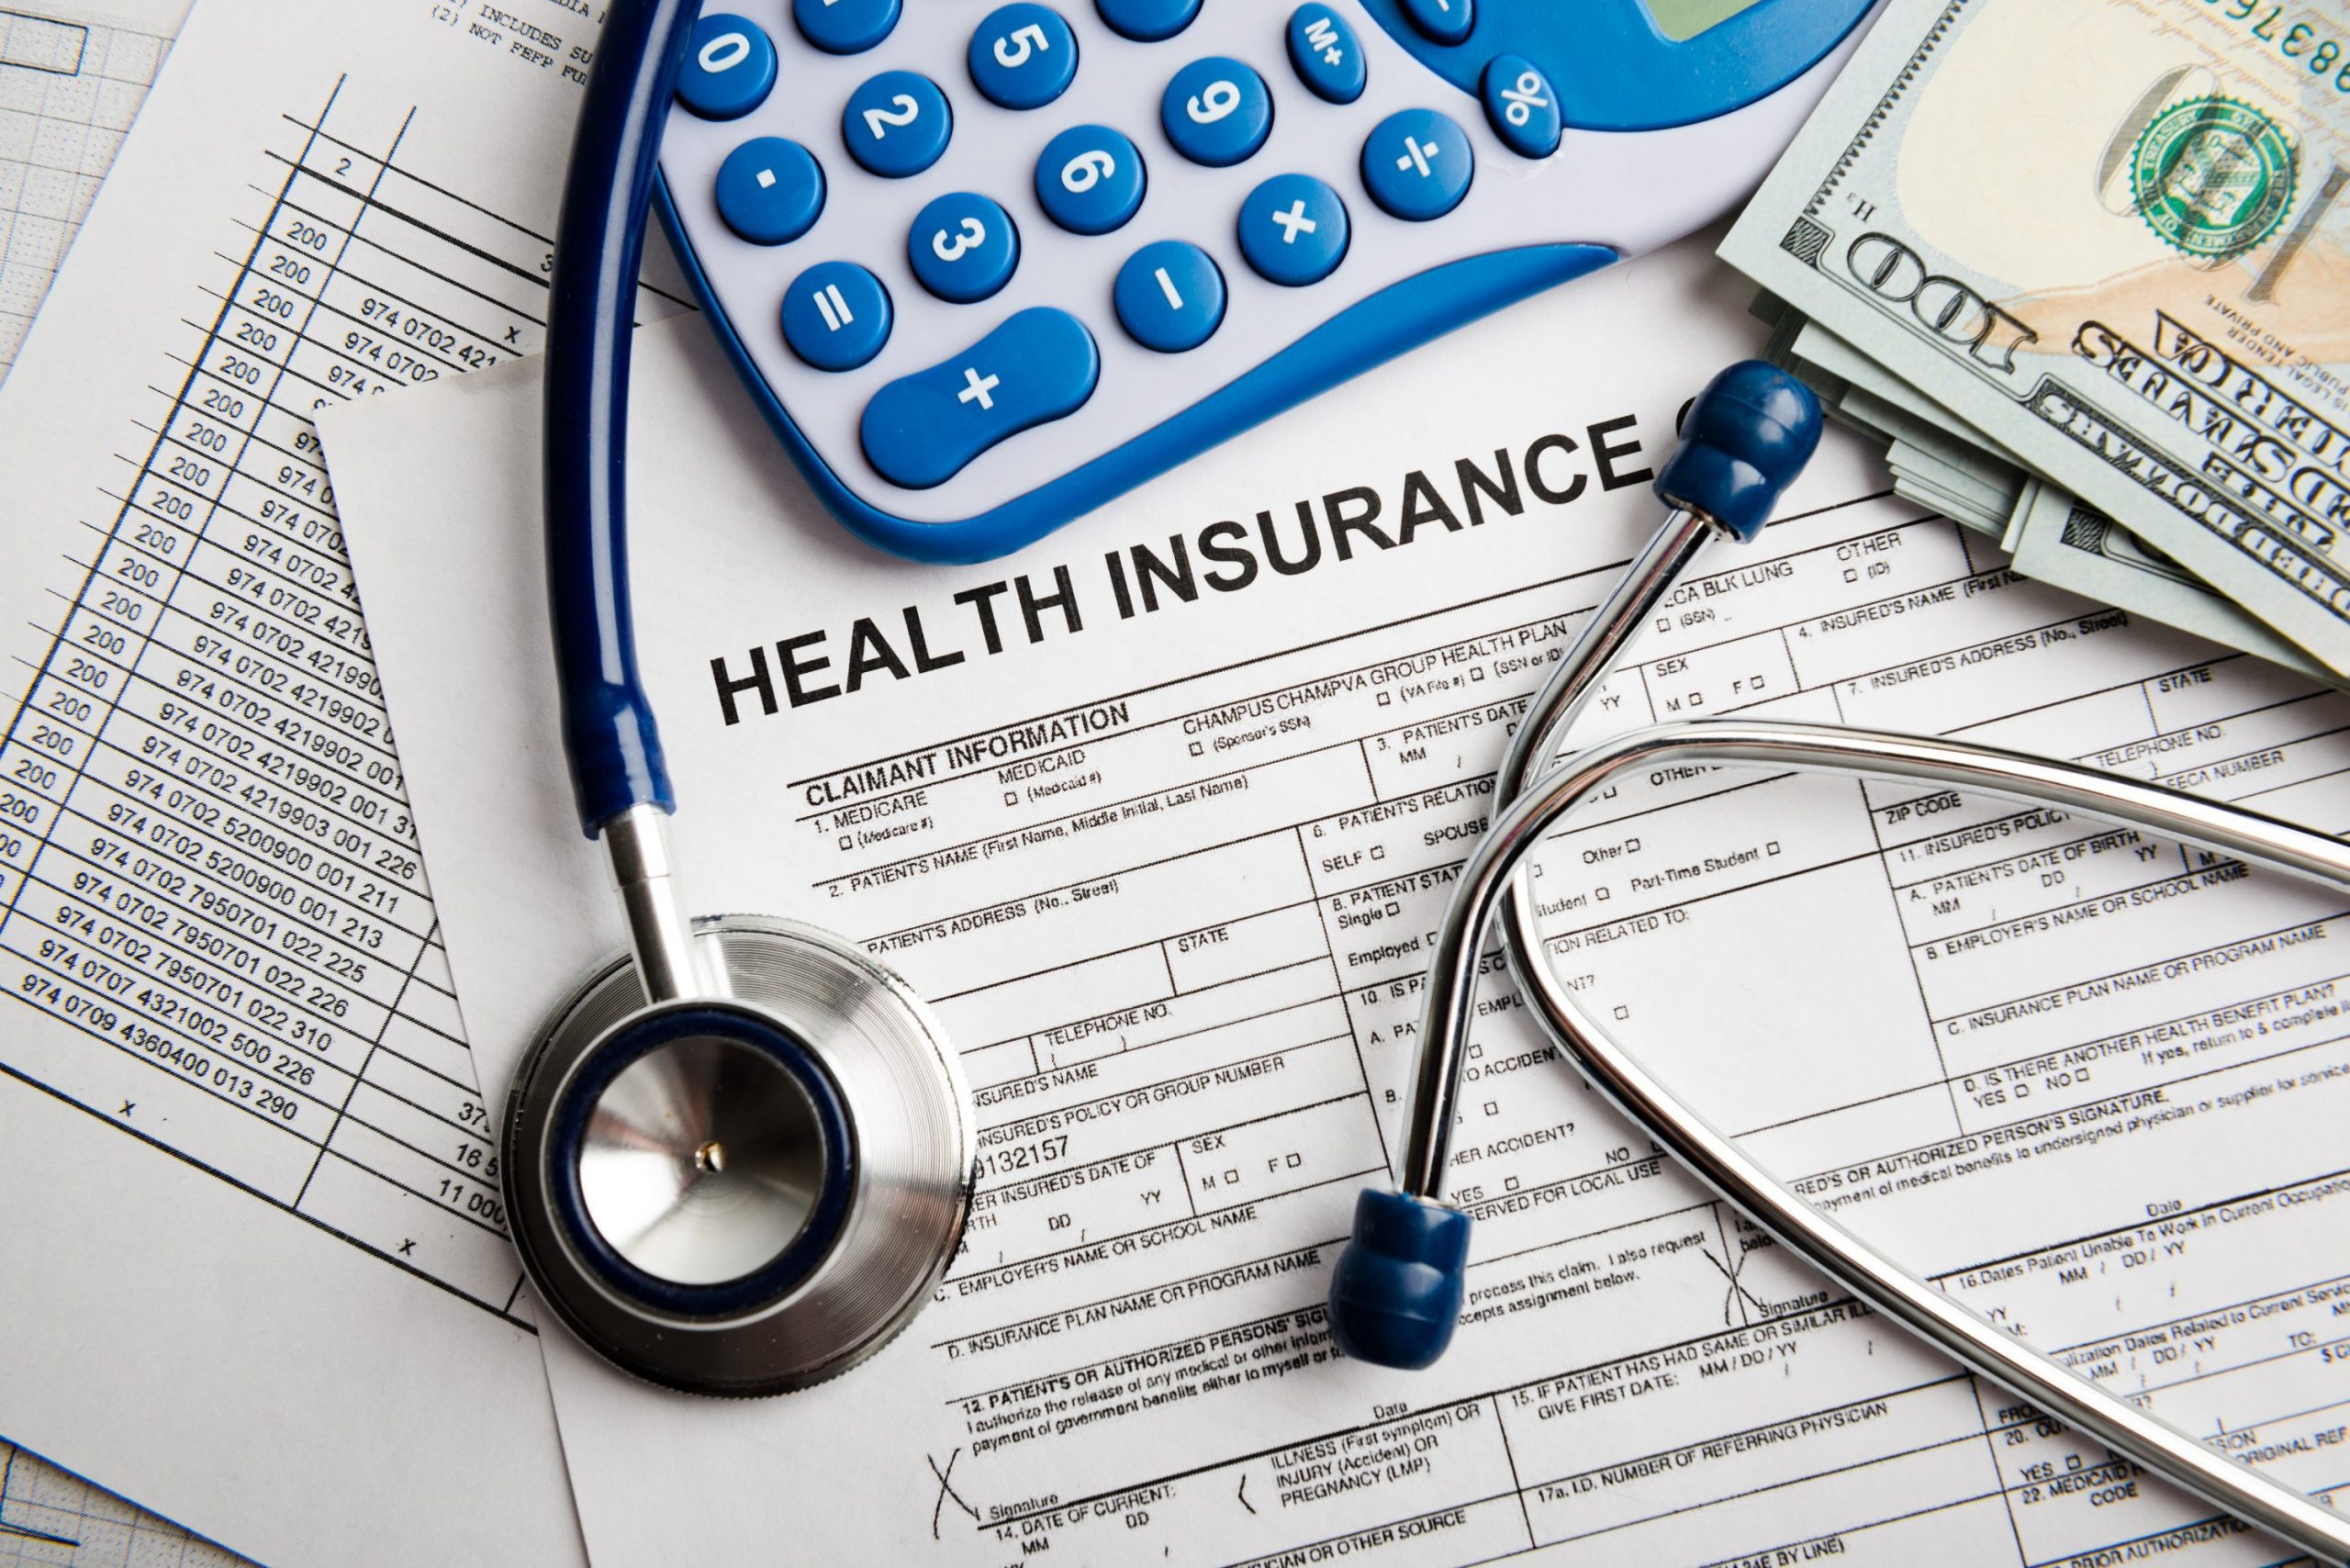 Health Care Insurance: Benefits Of Having Individual Health Insurance Coverage